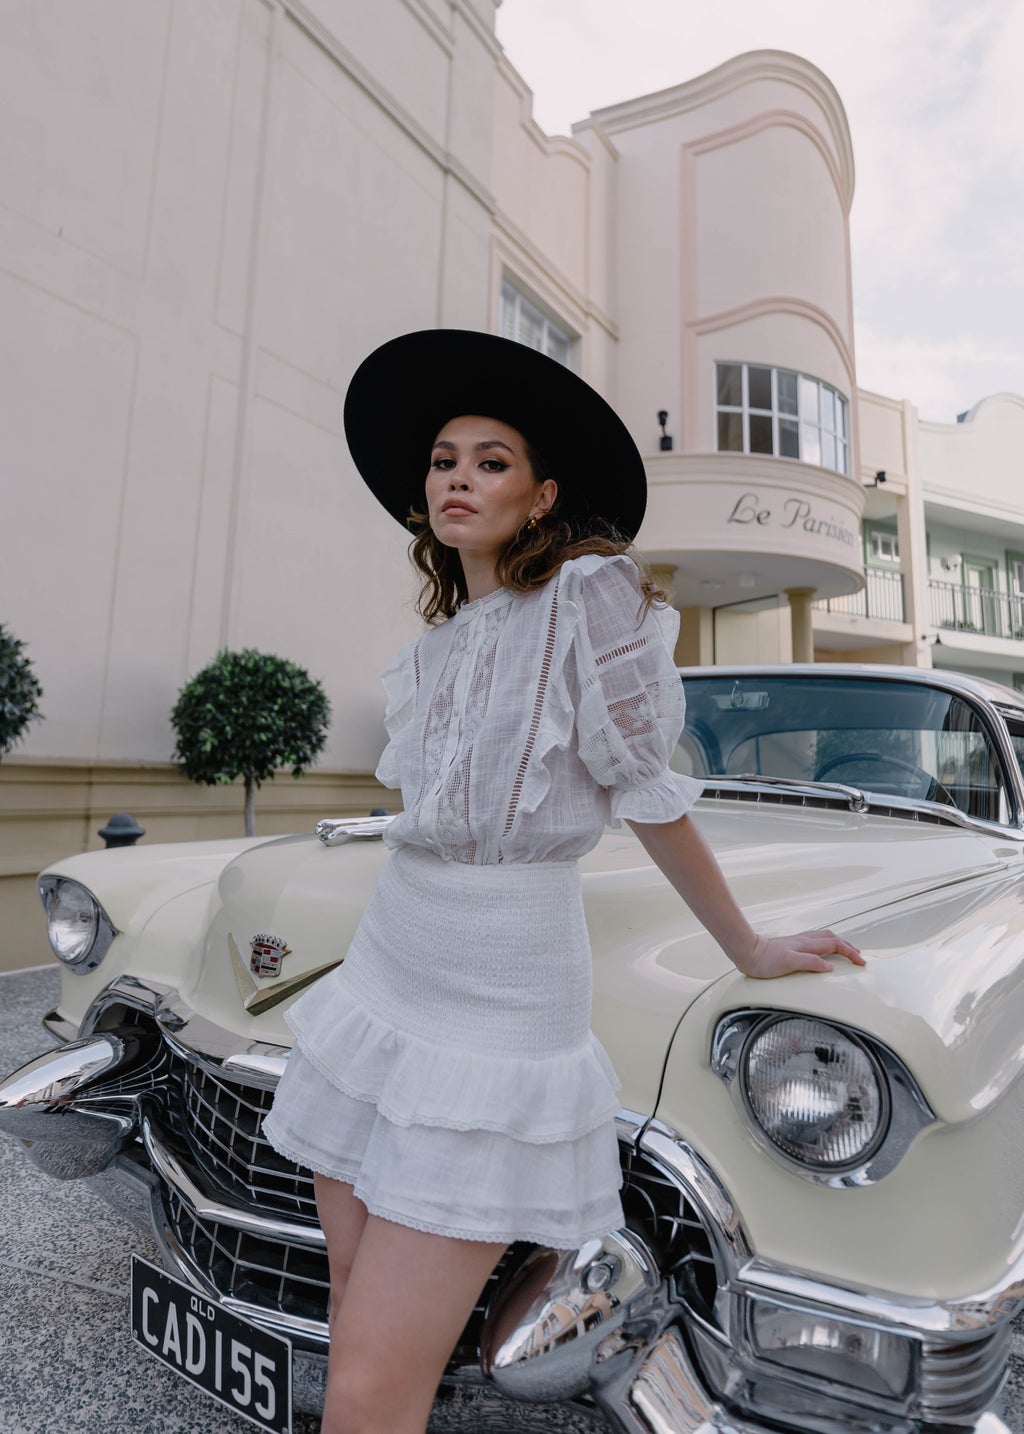 Woman in Hat and Skirt Posing by Vintage Car